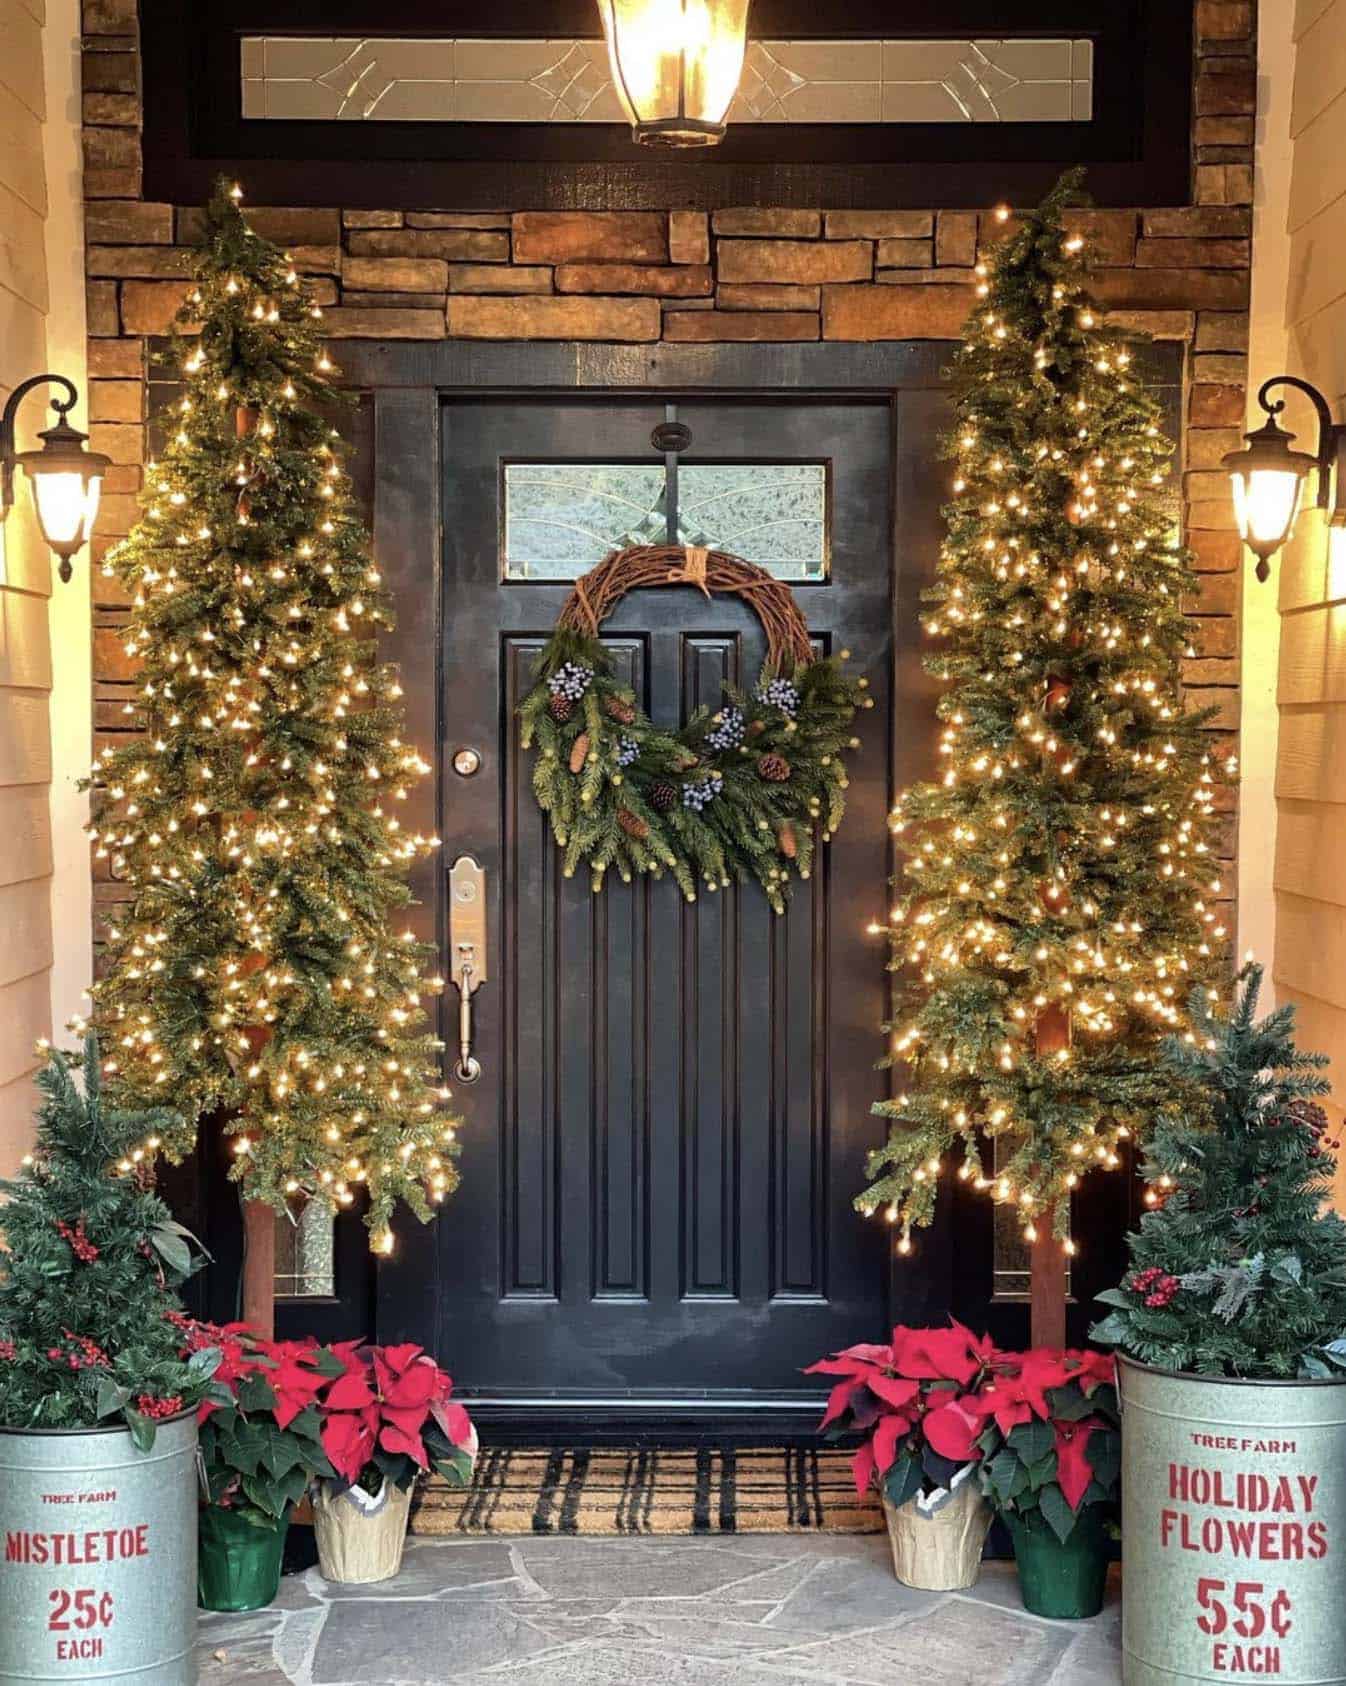 Christmas decorated front door with a garland, wreath and poinsettias